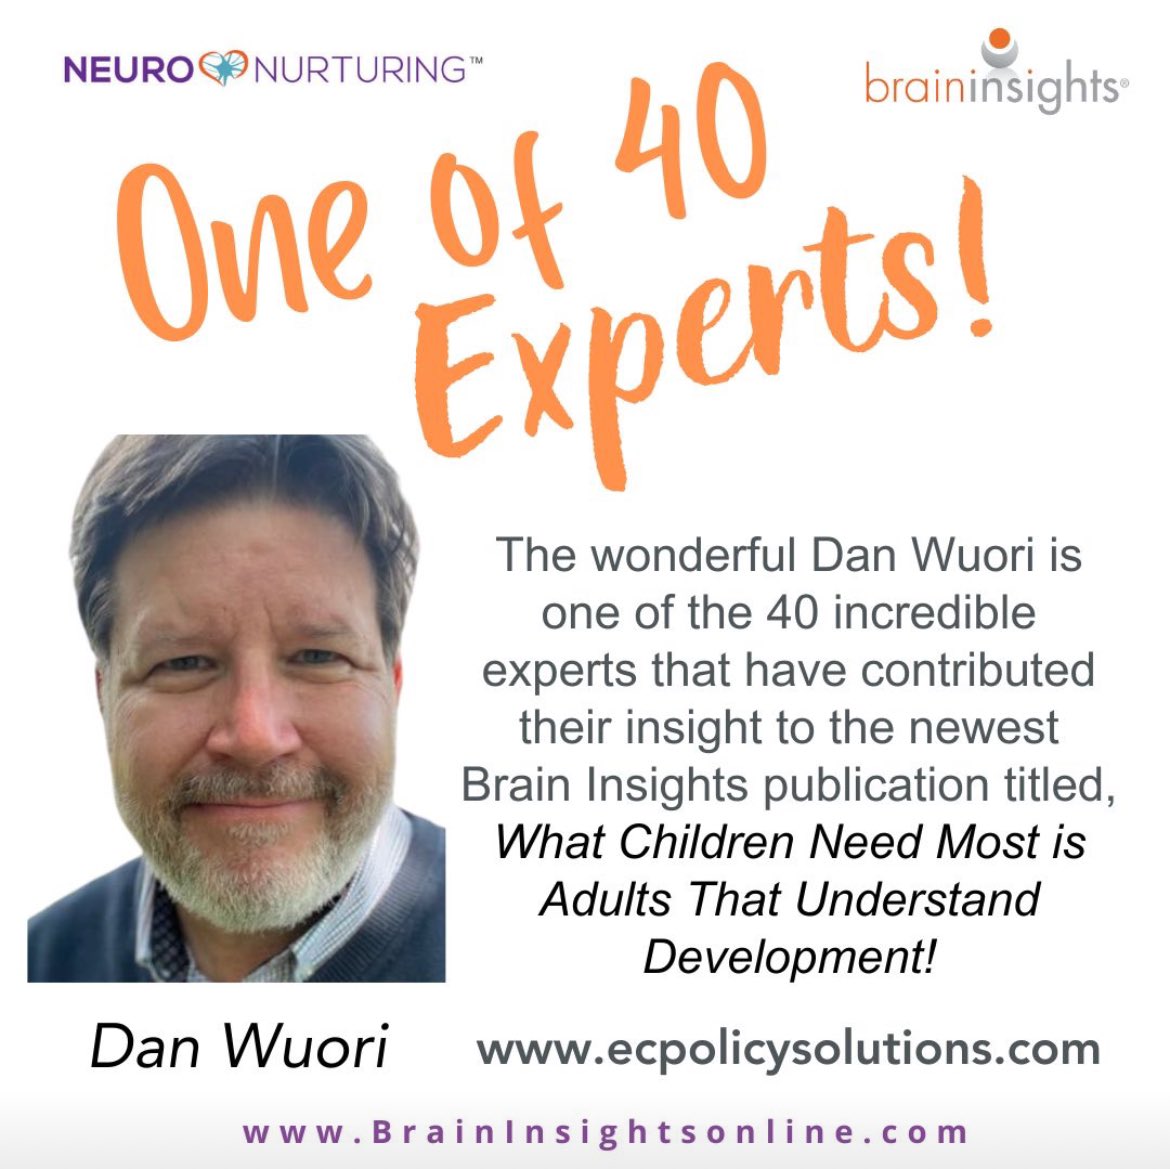 Are you familiar with the fabulous work of @DanWuori ? If not, you certainly will want to be. He provides incredibly valuable understanding about child development for the benefit of all who care for and about children! I am thrilled that he has also contributed his insights in